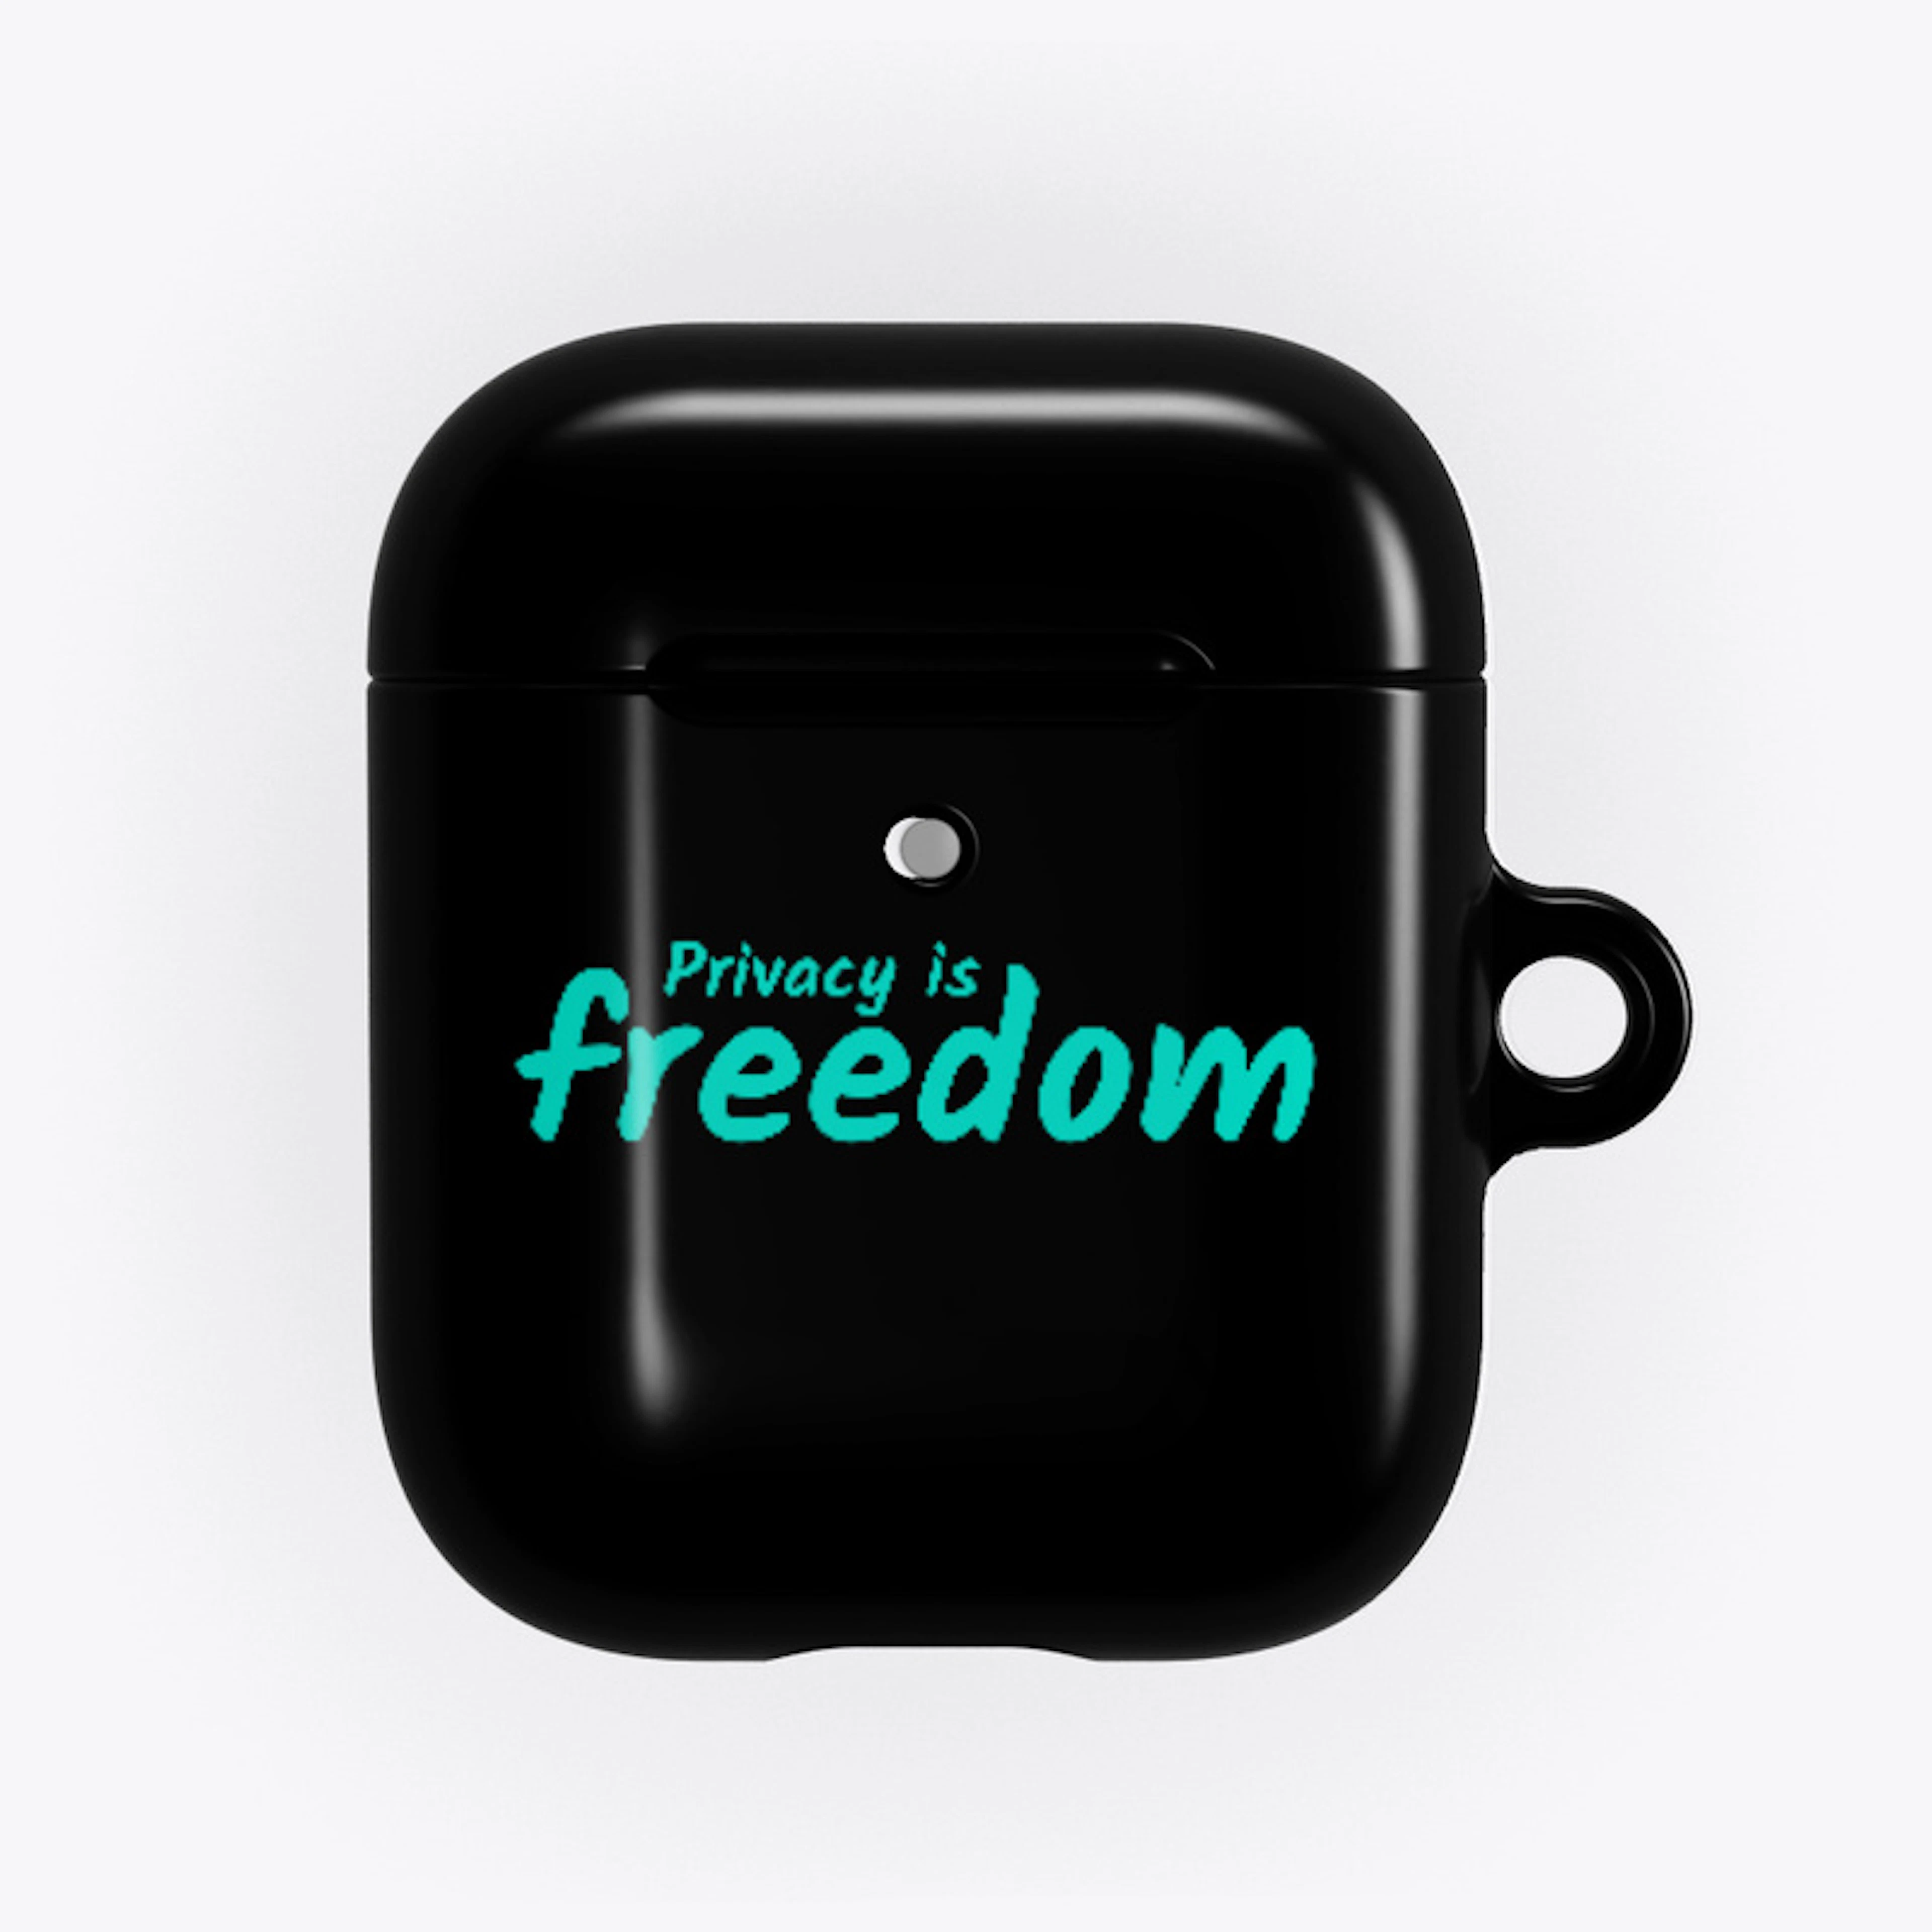 Privacy is freedom airpod case sleeve